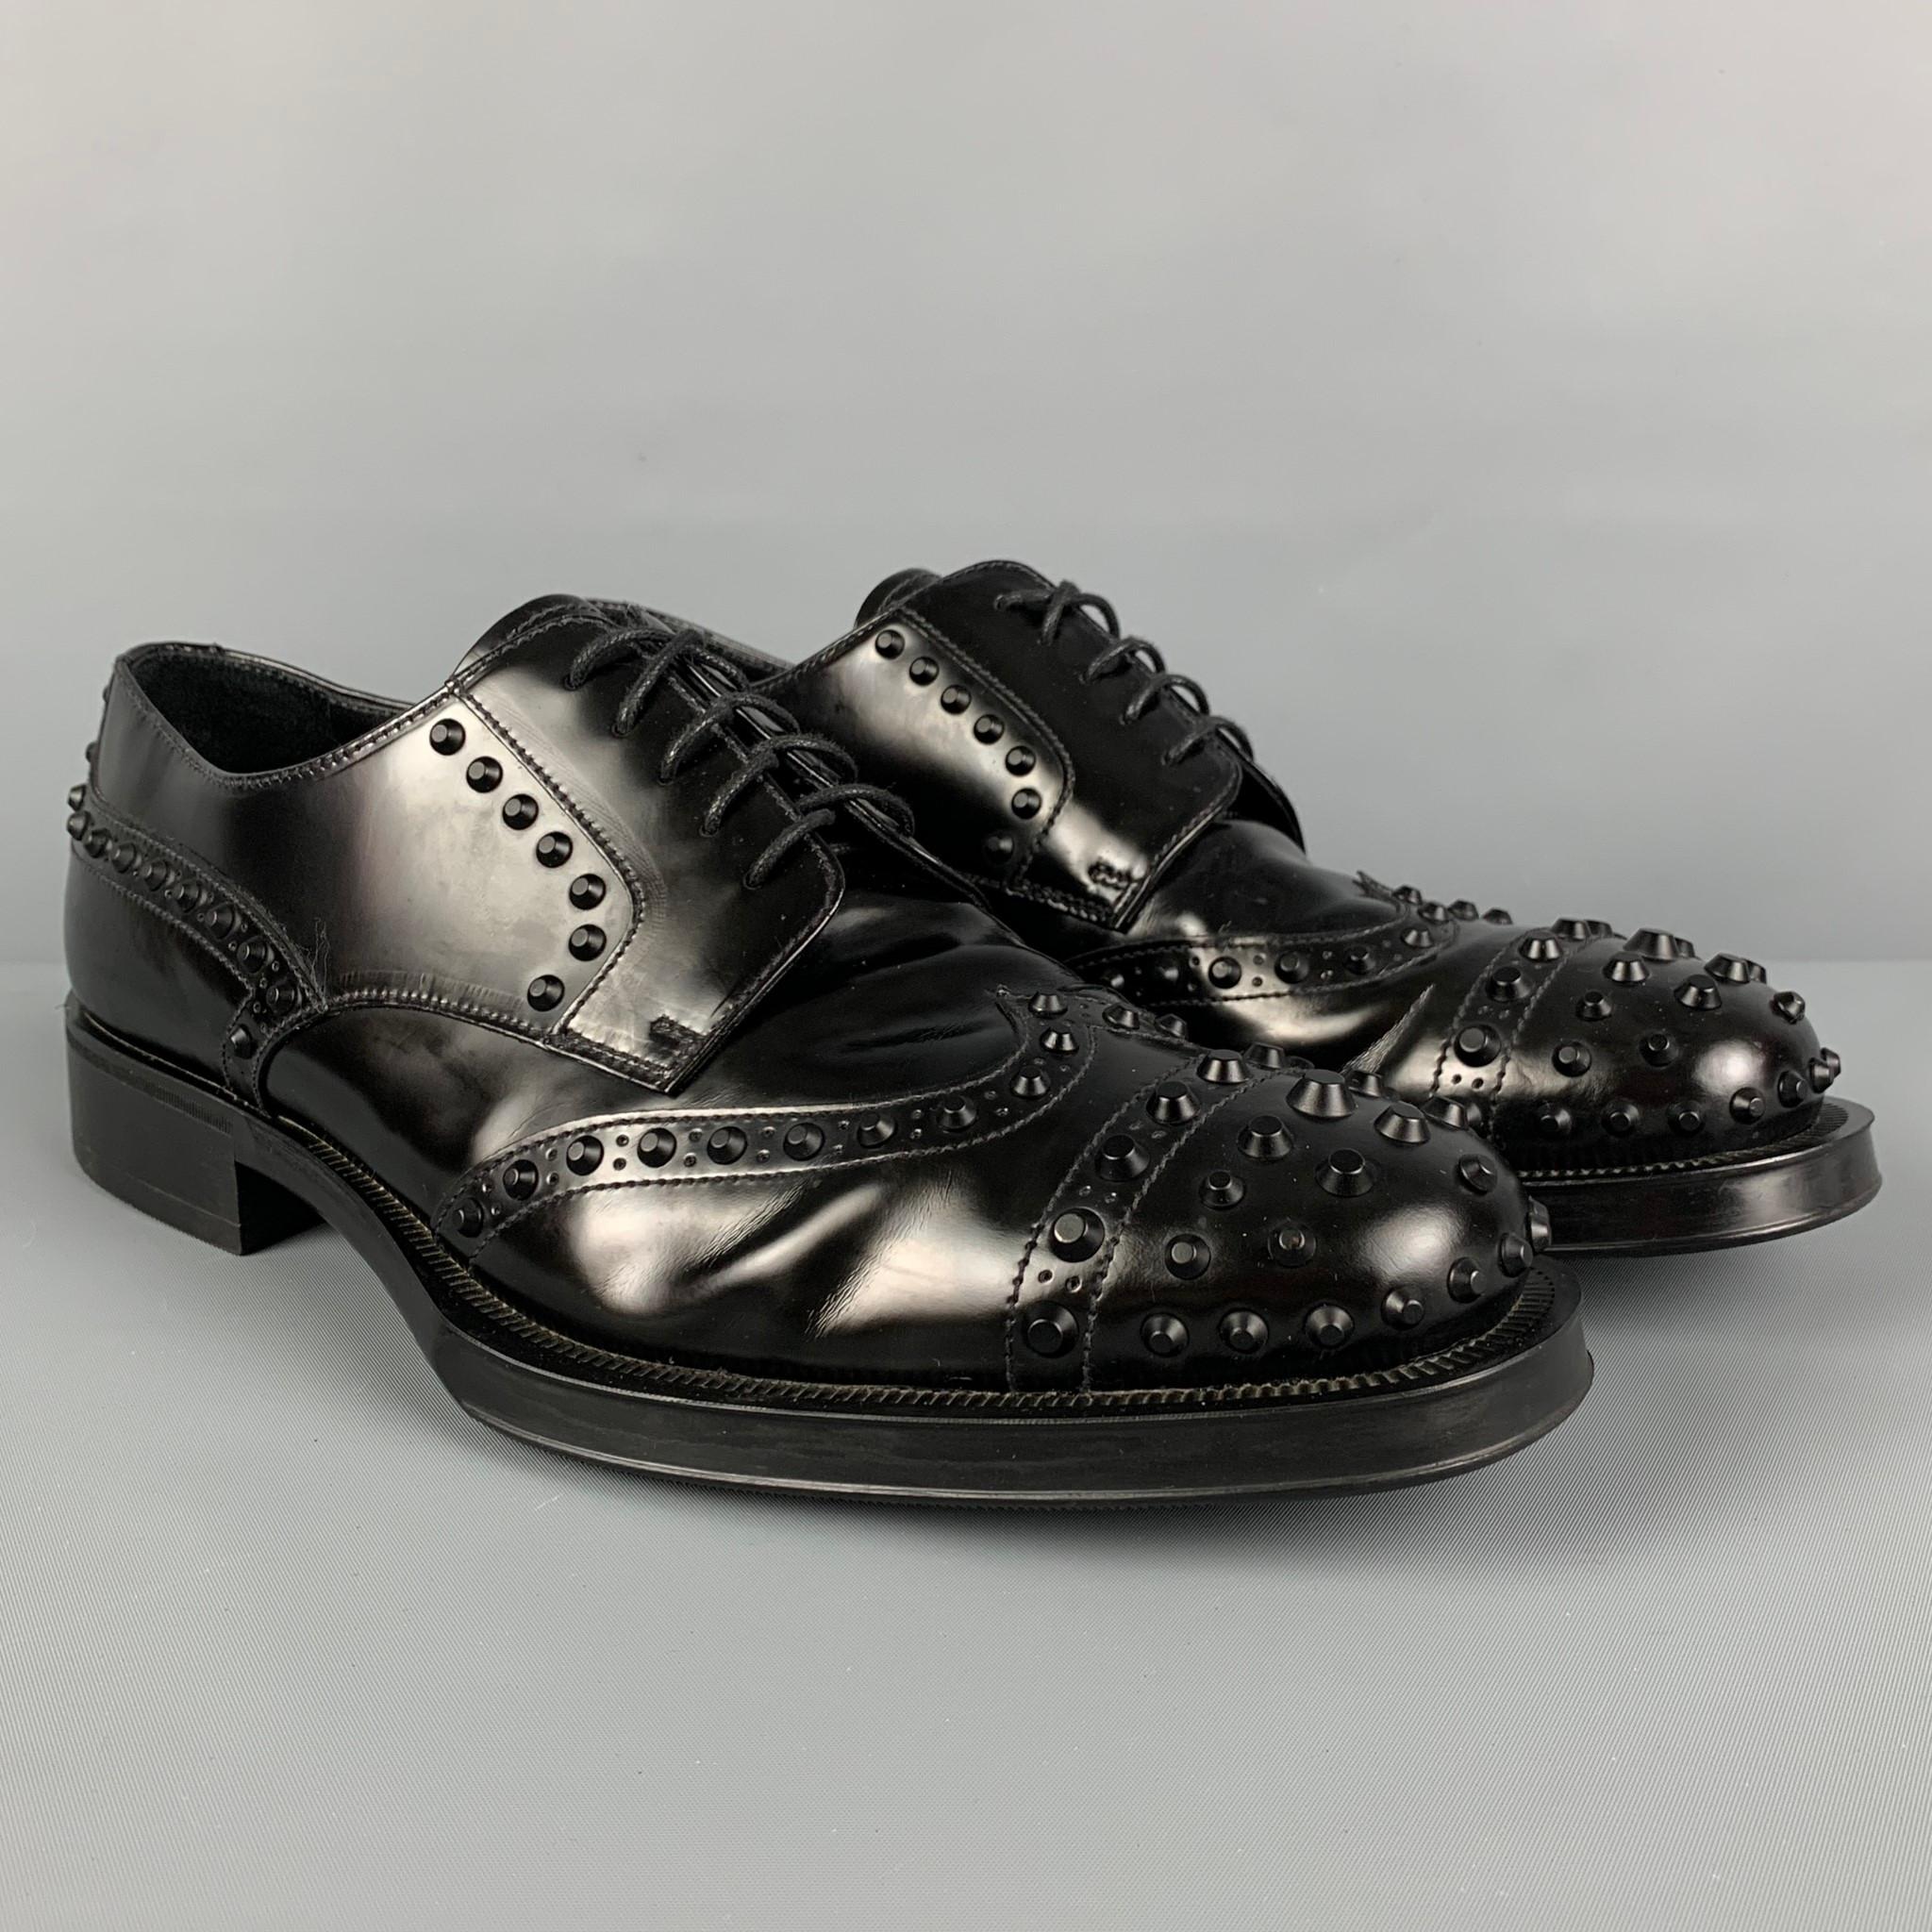 PRADA shoes comes in a black leather featuring studded details, cap toe, and a lace up closure. Made in Italy. 

Very Good Pre-Owned Condition. Light wear.
Marked: 2EE289 9.5

Outsole: 12.25 in. x 4.5 in. 